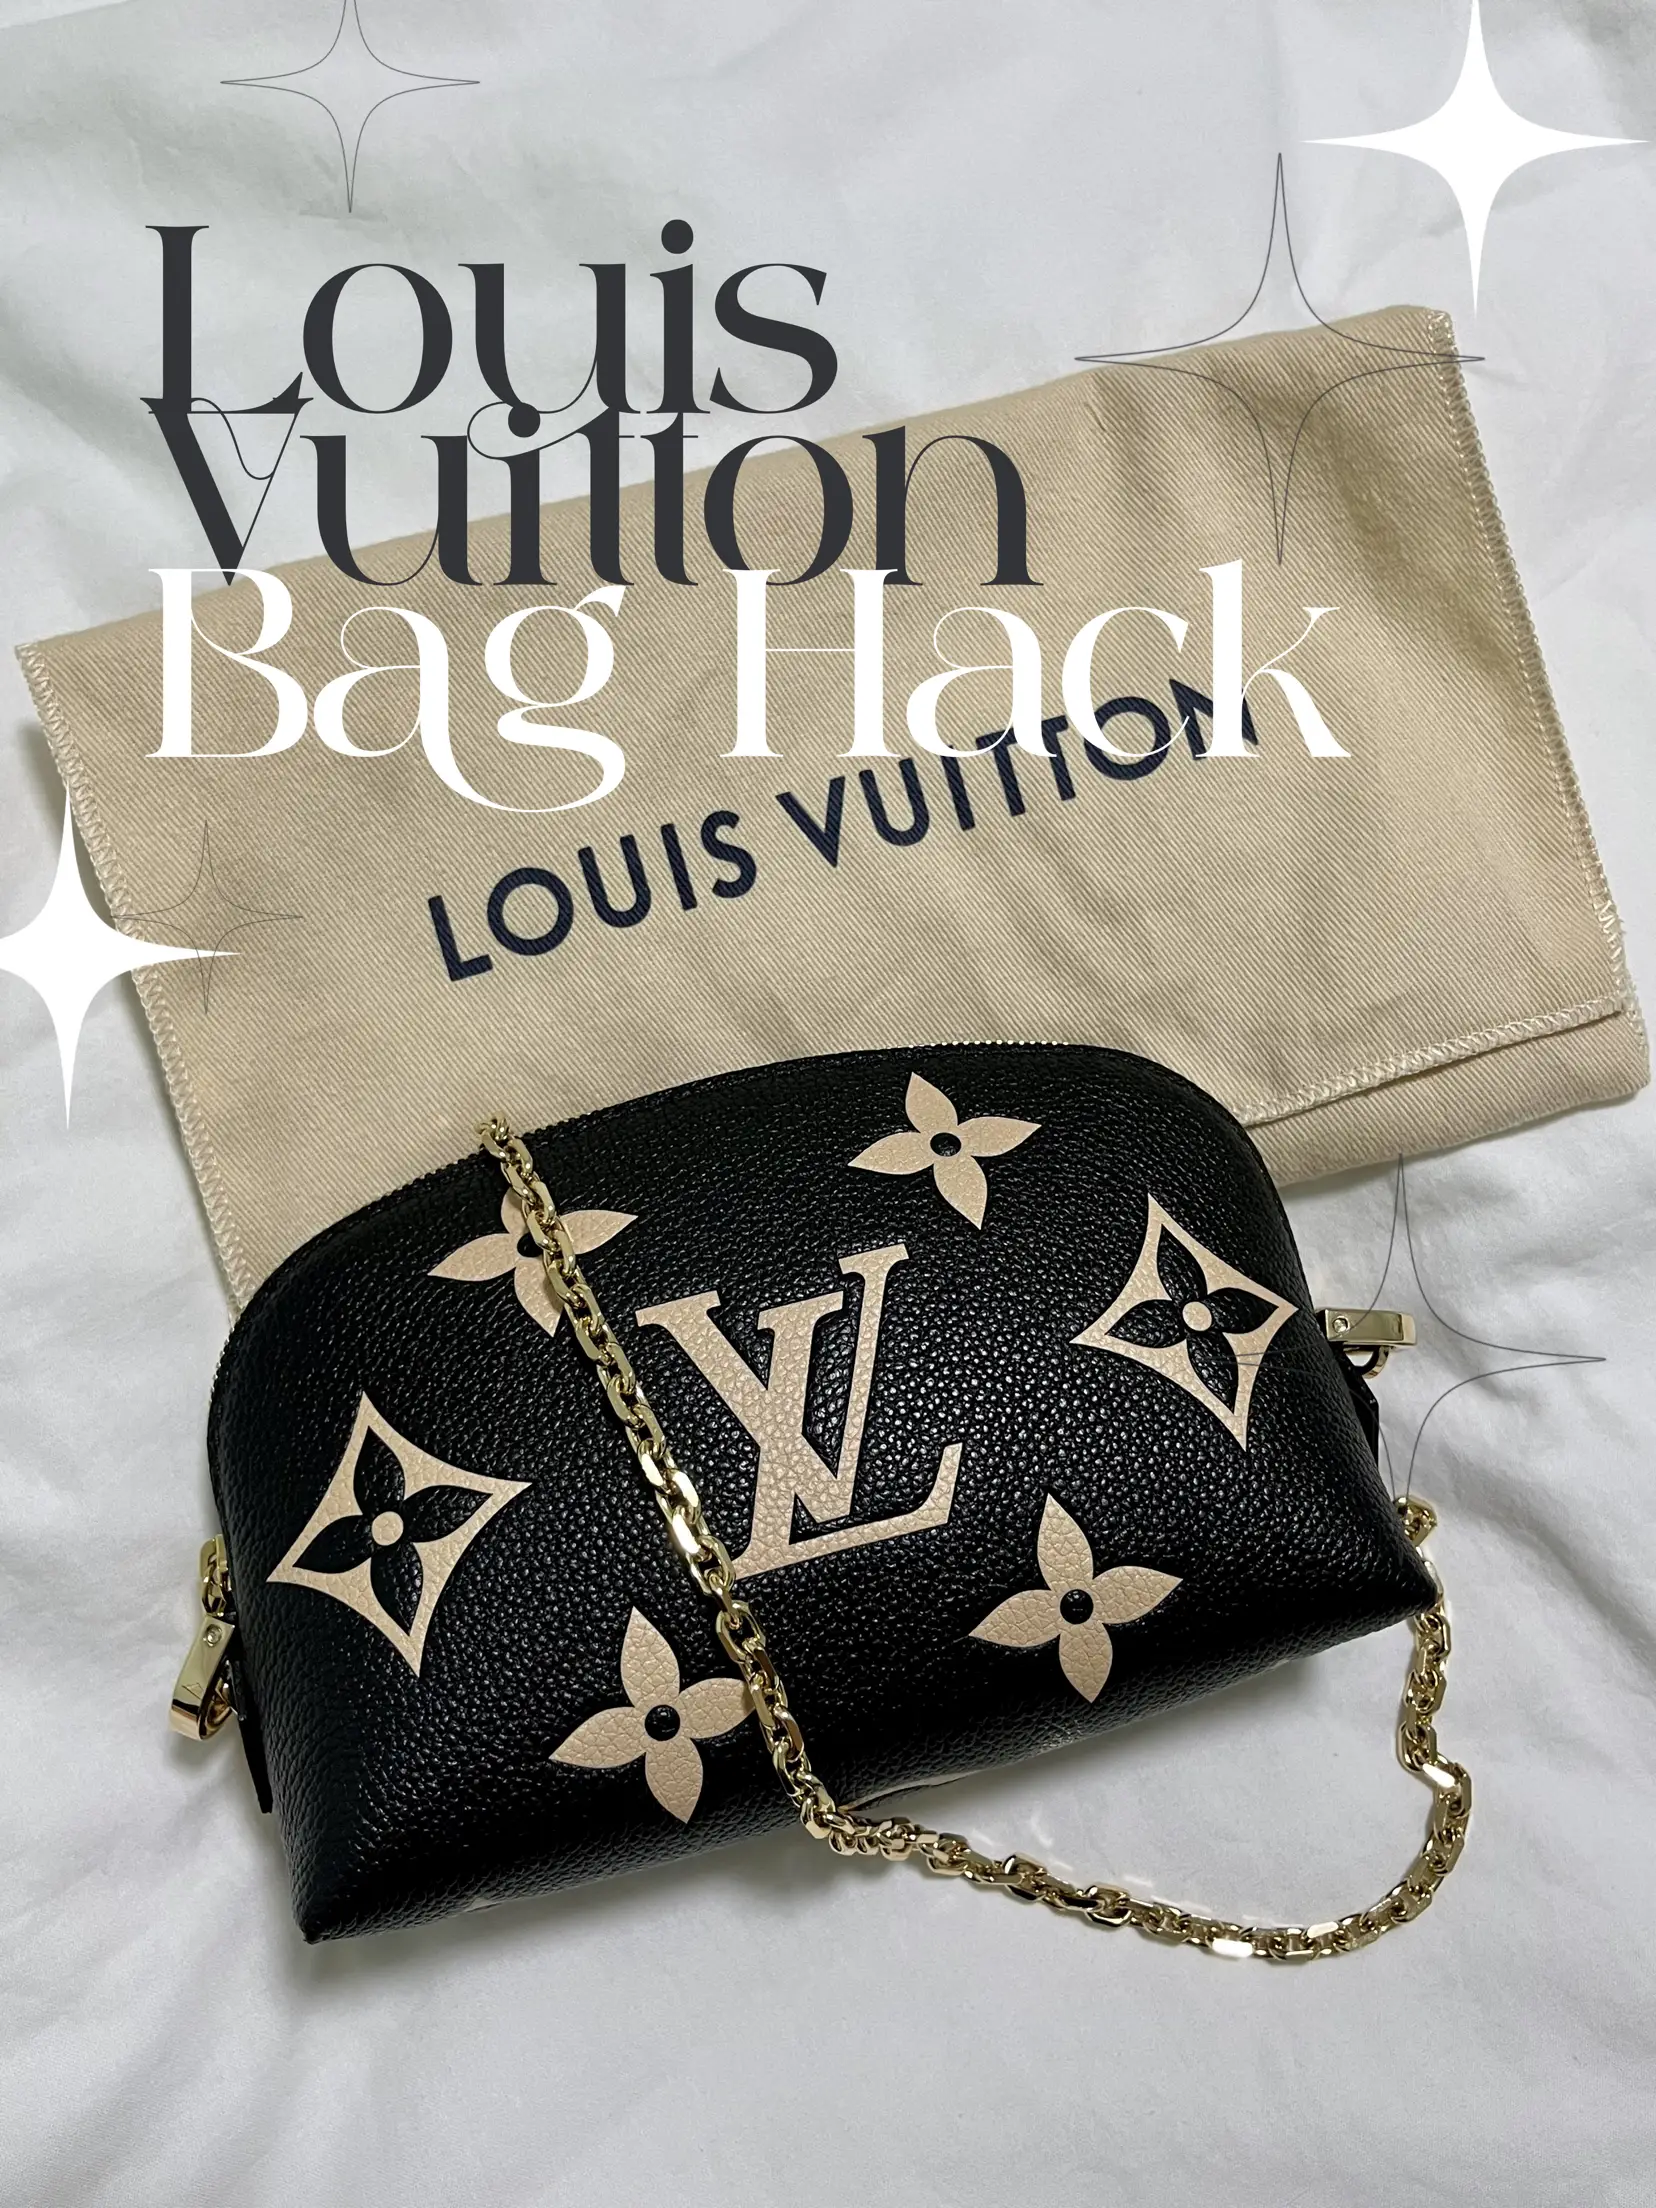 Louis Vuitton hack. If you are considering buying a Louis Vuitton